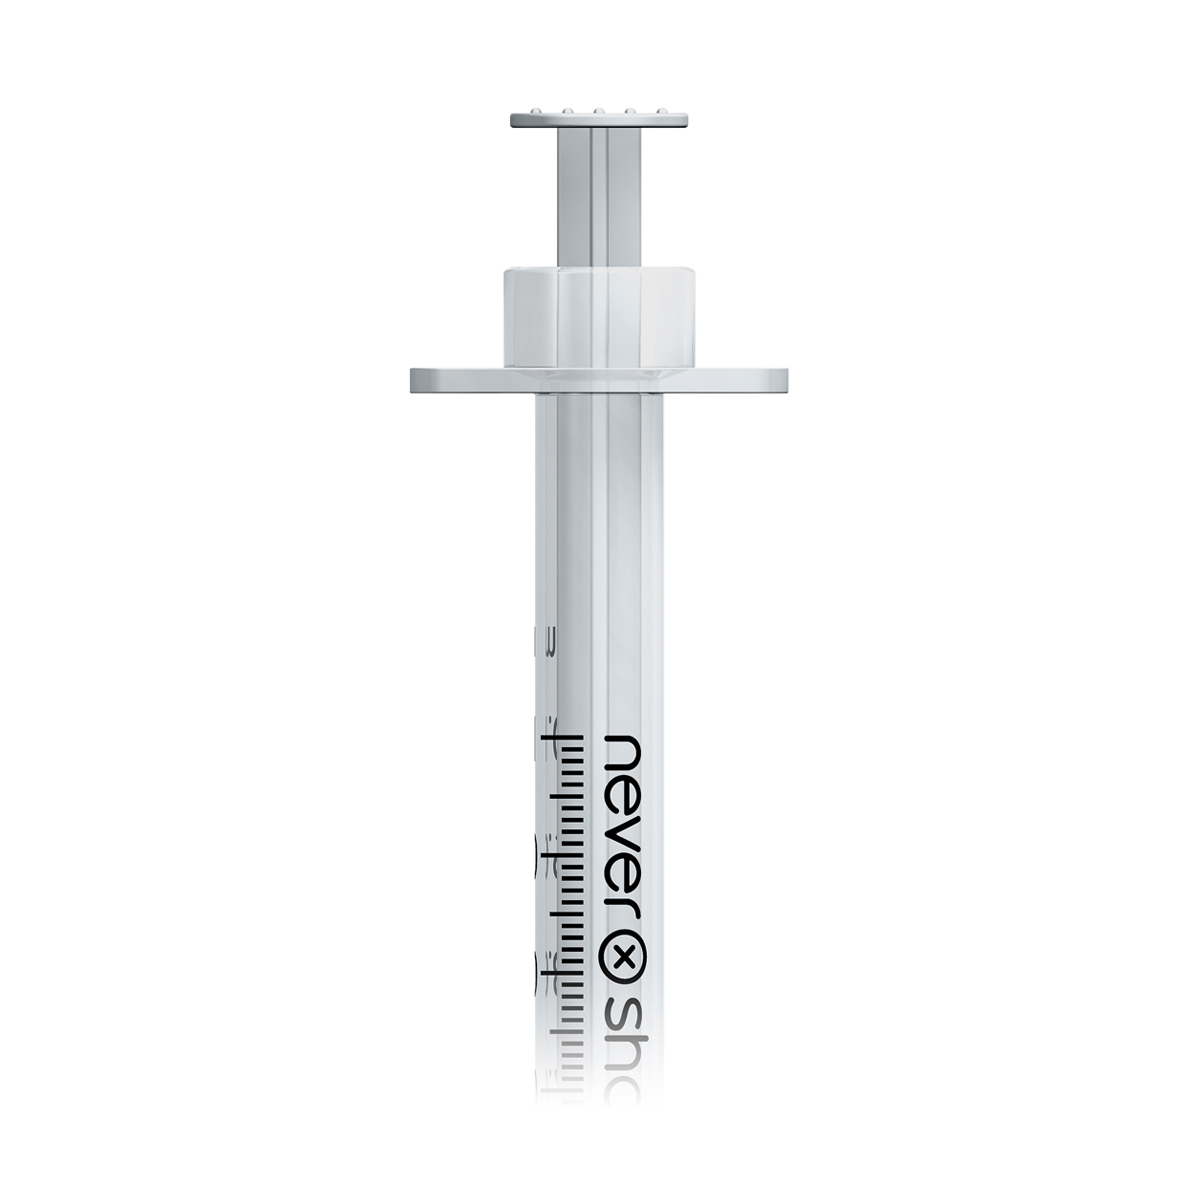 Nevershare 1ml 30G fixed needle syringe: white (discontinued, see below)